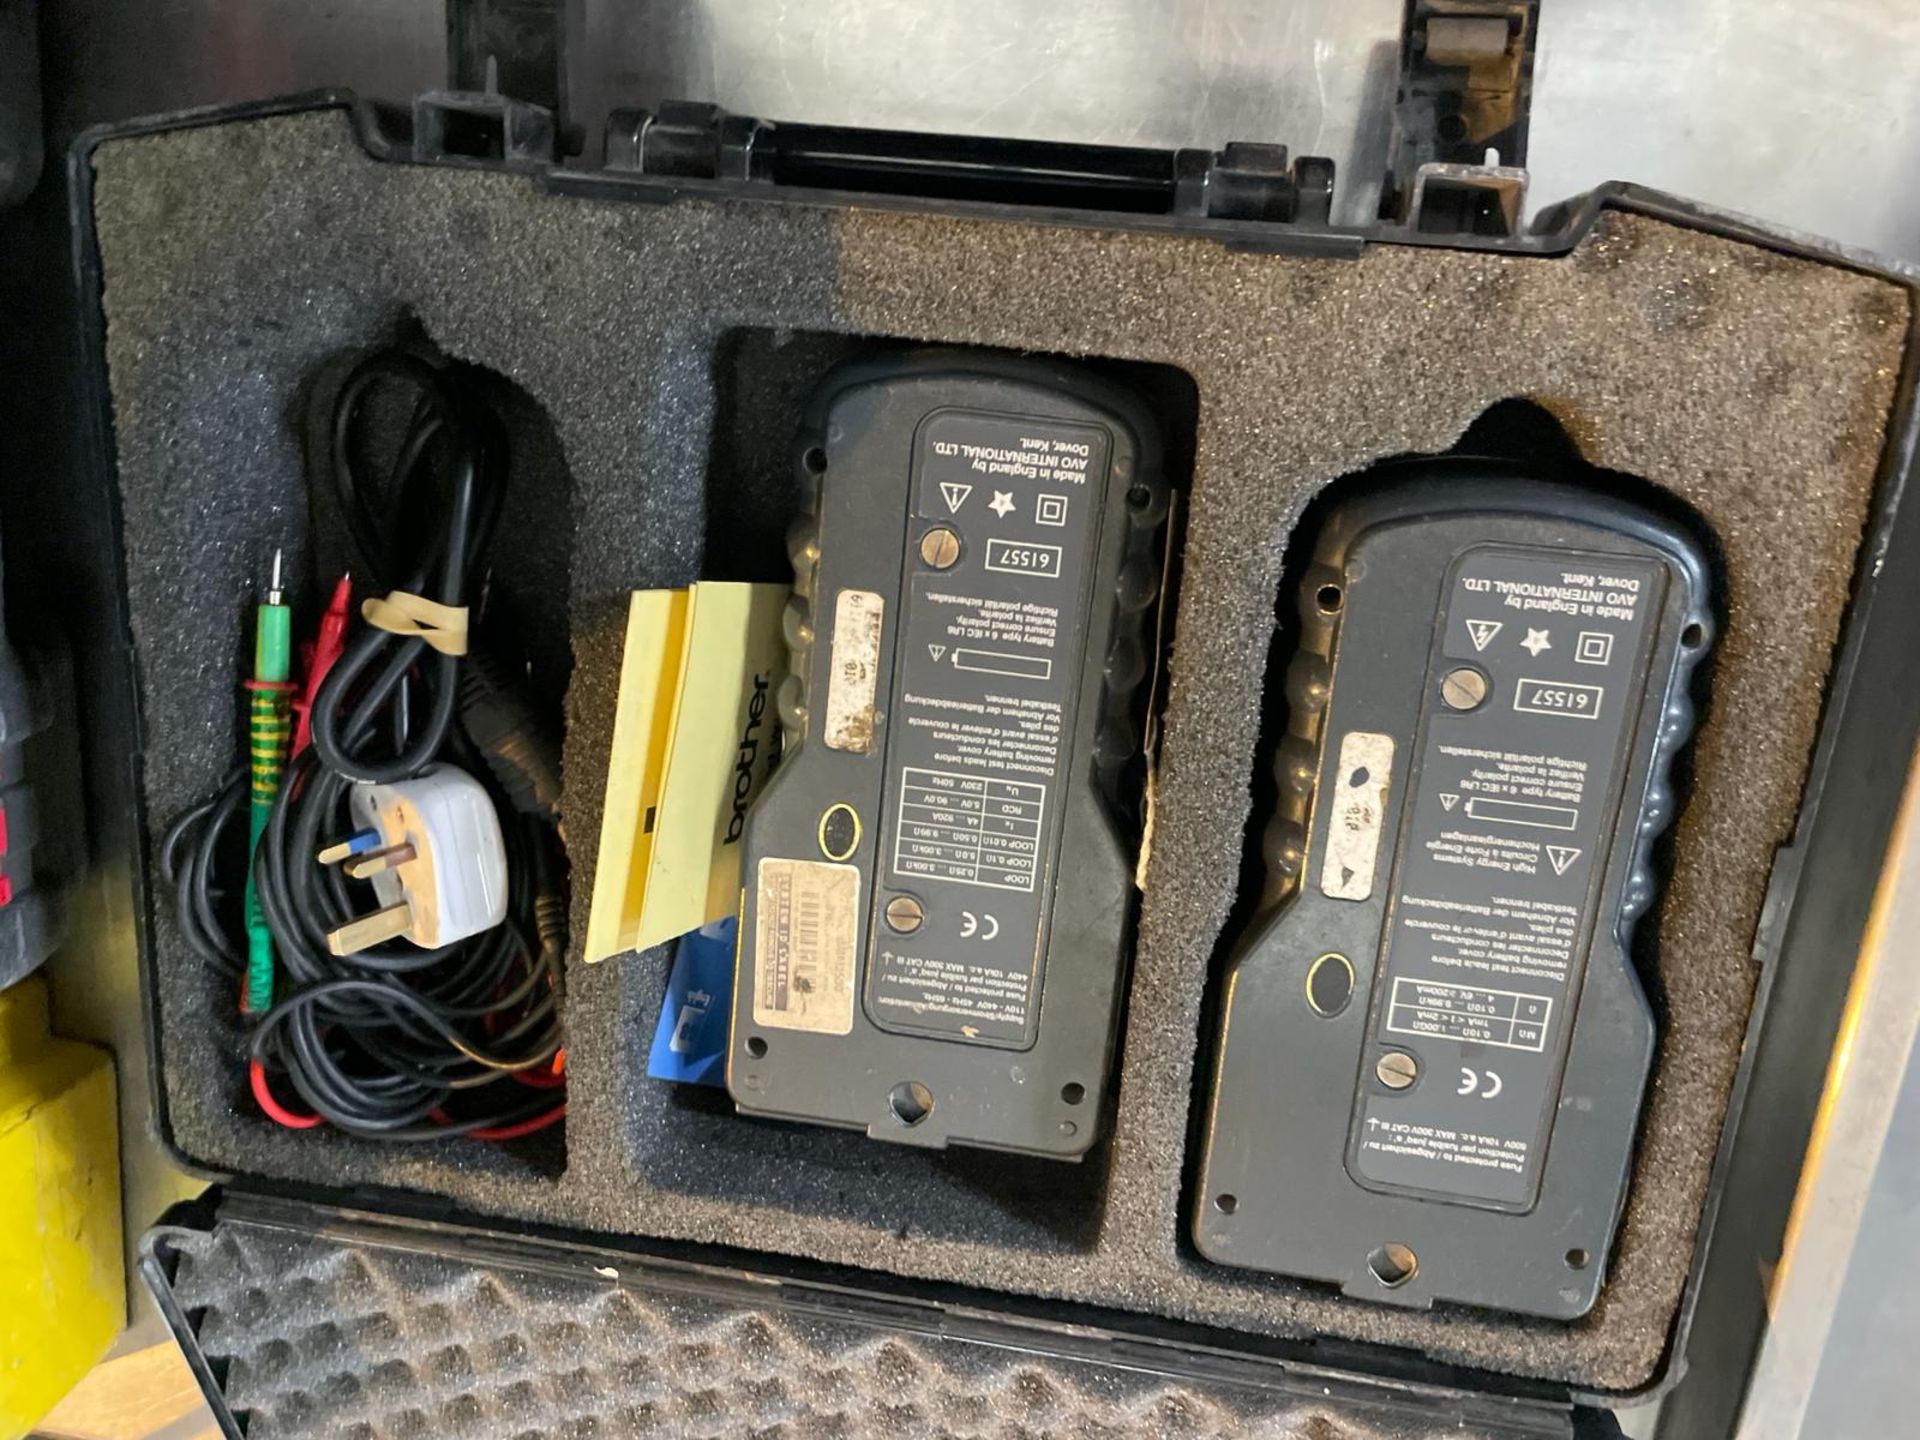 1 x Megger Testing Kit Including LCB2500 Loop/RCD Tester and a BMM2500 Insulation Multimeter - Image 11 of 12